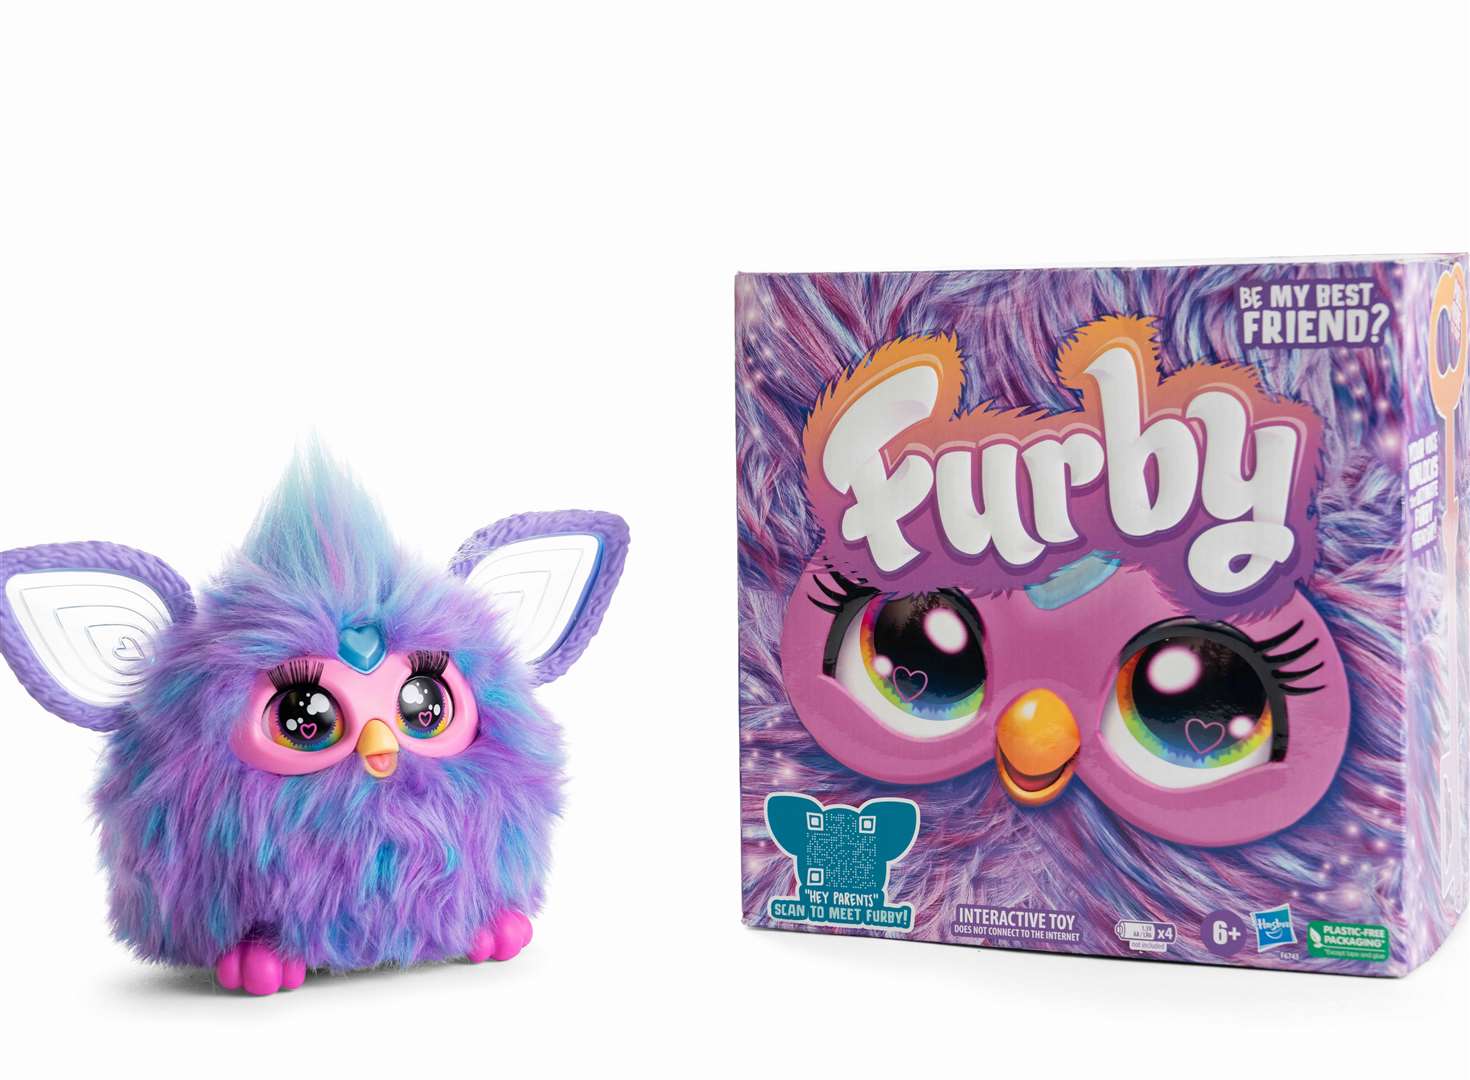 The Furby is back in children’s wish lists. Image: Argos/Hasbro.